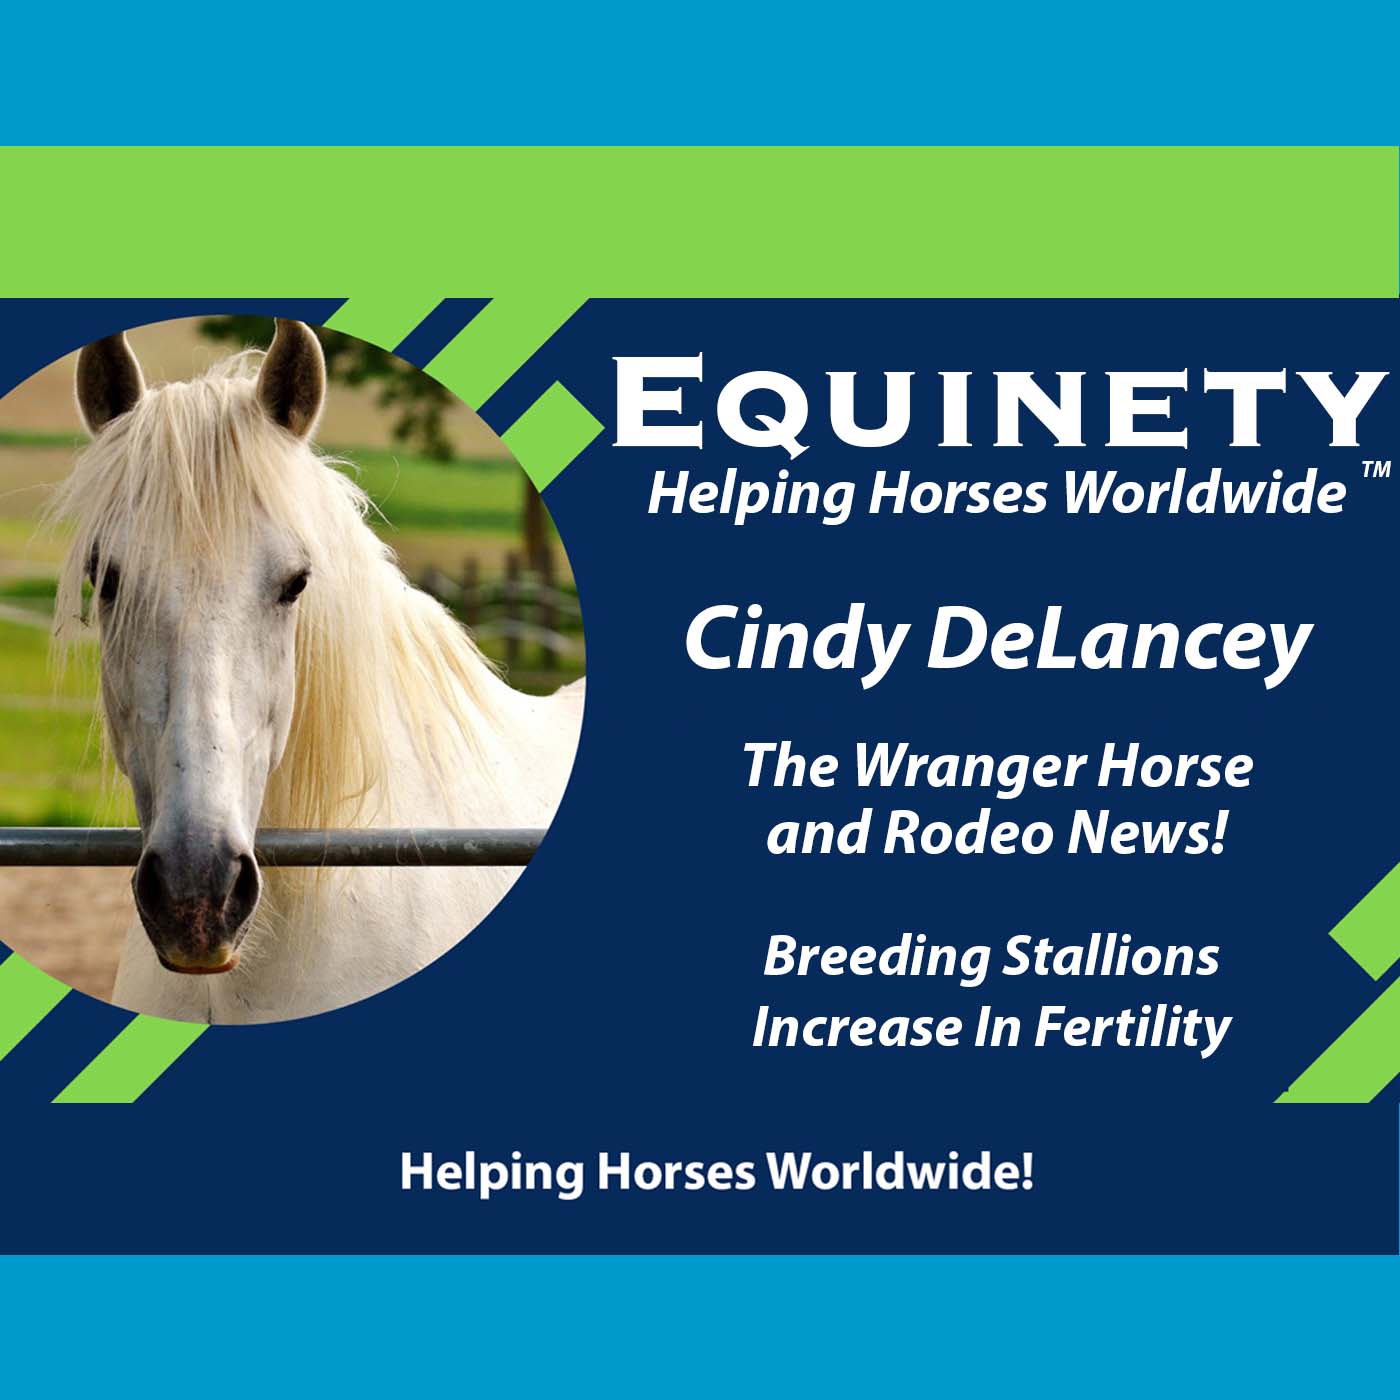 Cindy DeLancey - The Wrangler Horse and Rodeo News - Breeding Stallions